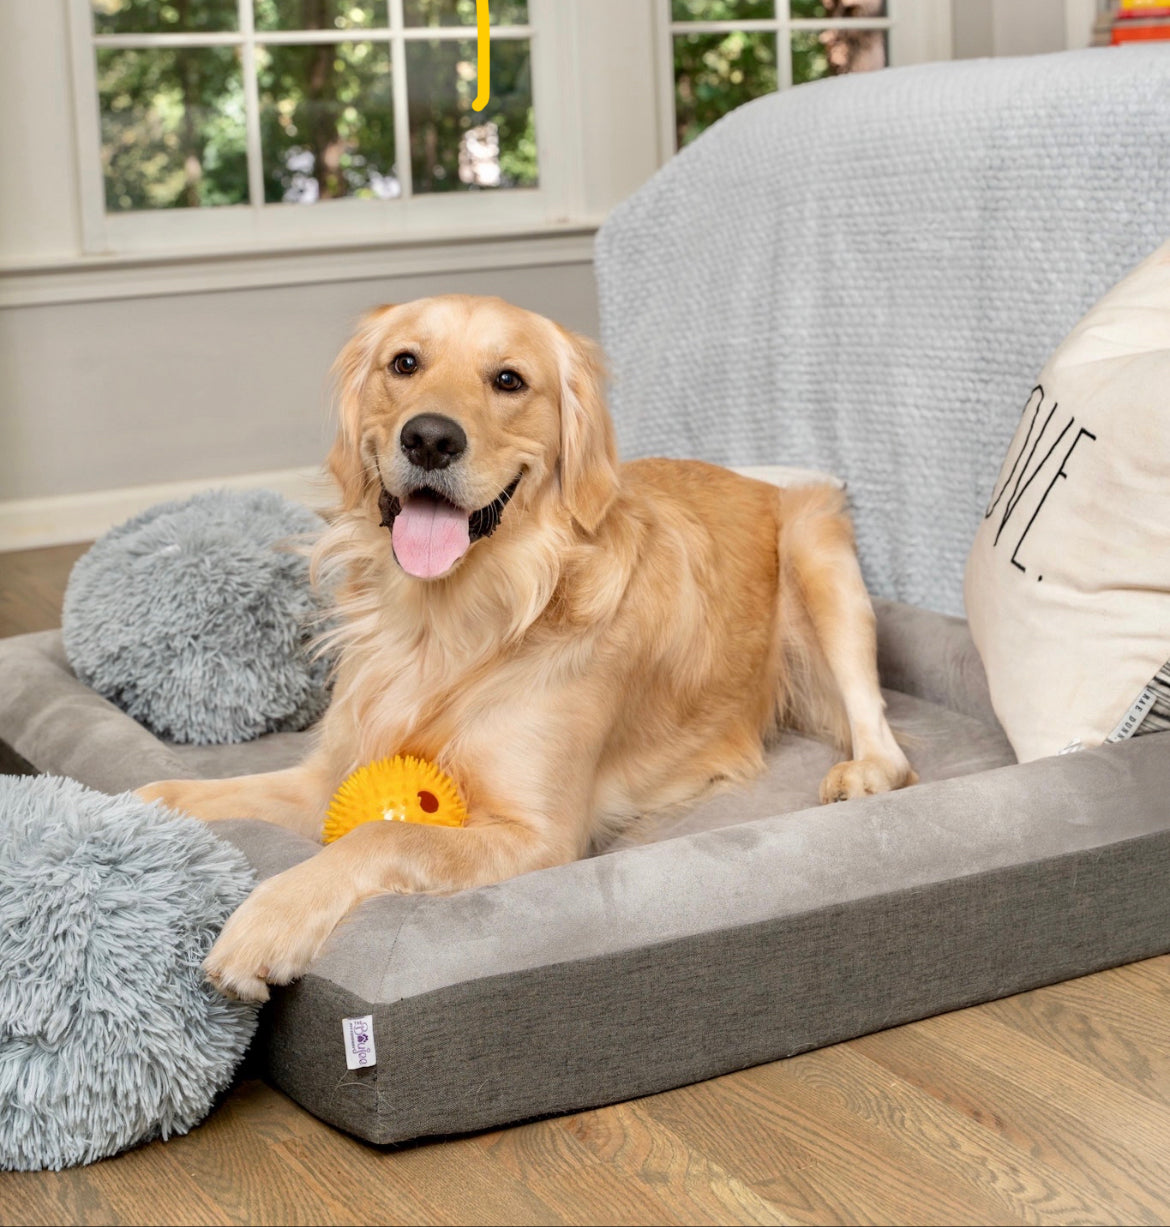 Introducing the Boujee luxury dog bed!